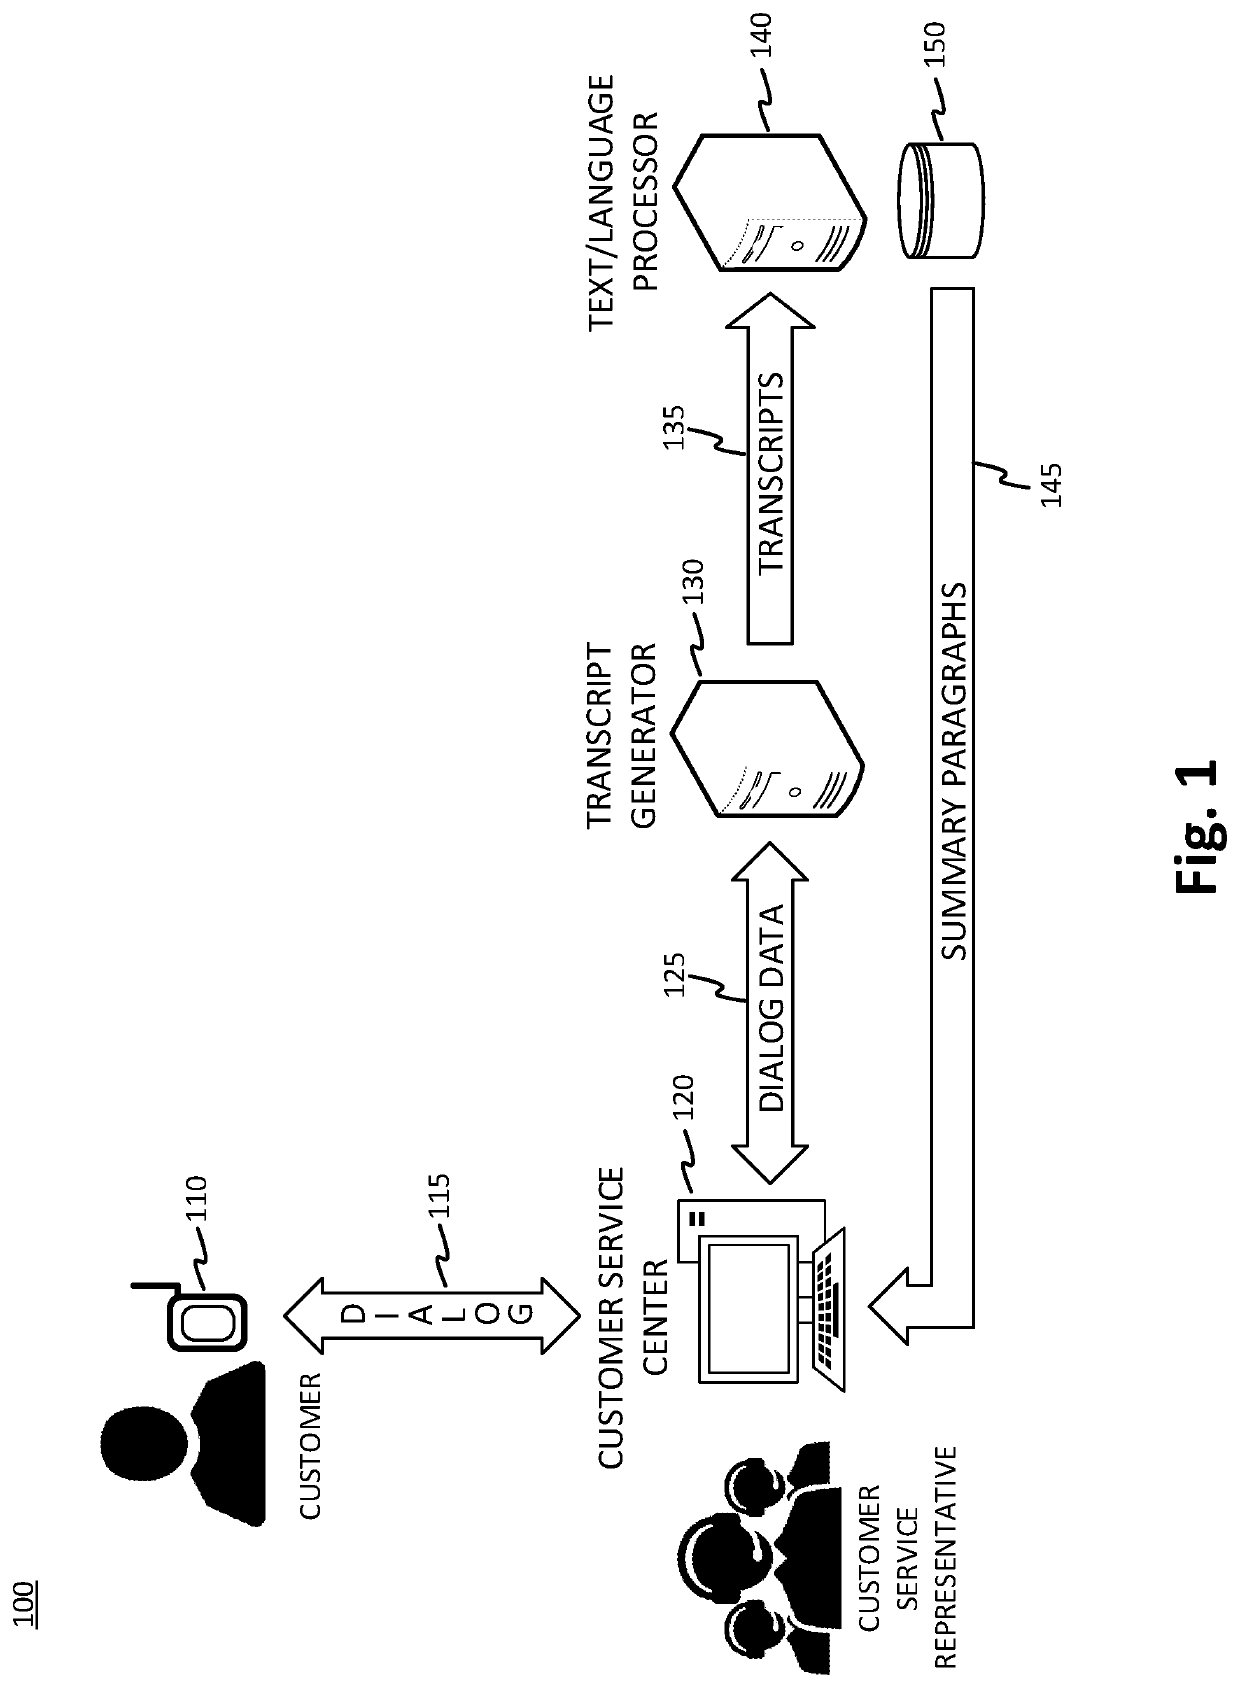 Method and apparatus for summarization of dialogs